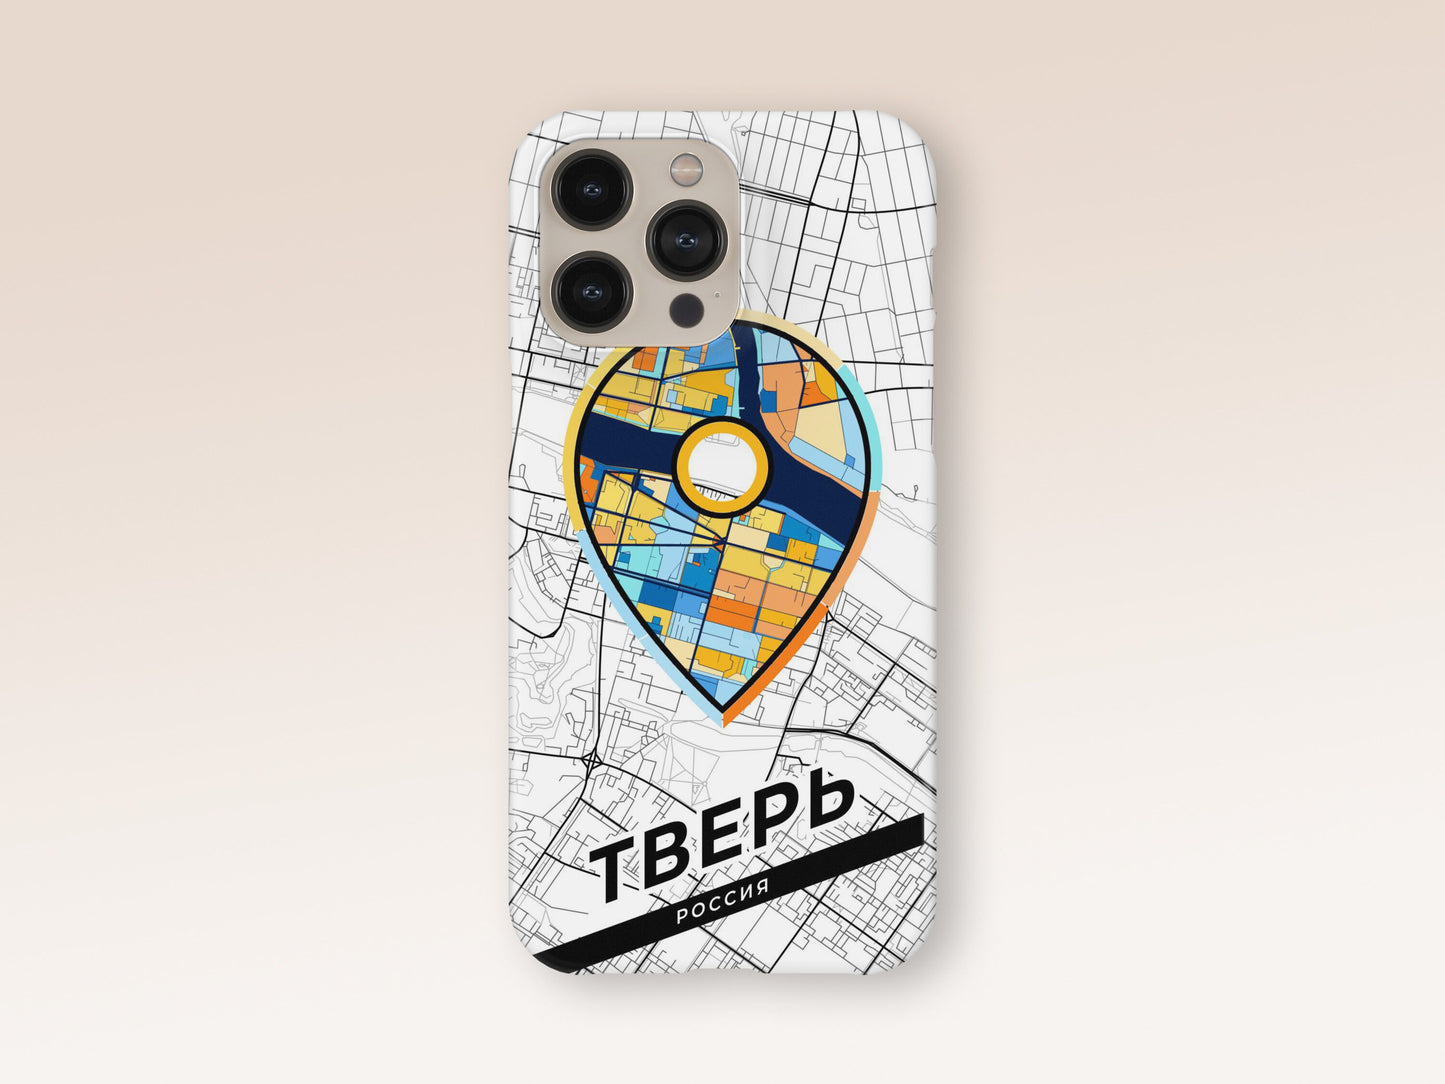 Tver Russia slim phone case with colorful icon 1